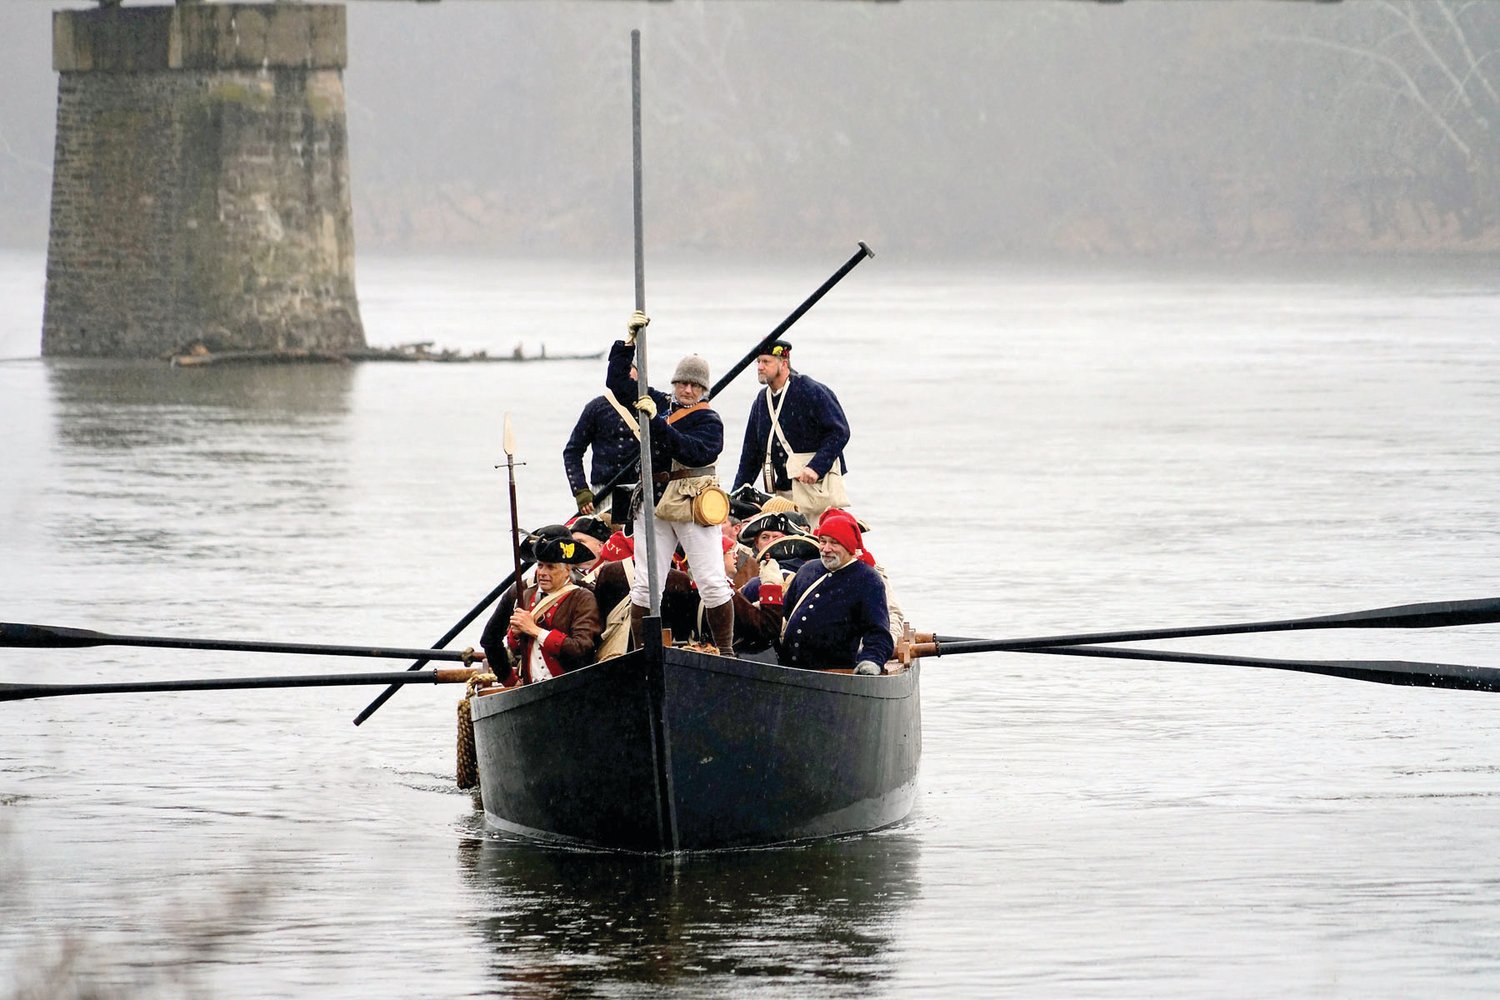 Reenactors row across the Delaware River in a Durham boat. Each December, thousands gather on the banks of the Delaware River to watch the reenactment of George Washington’s daring 1776 Christmas Night river crossing.